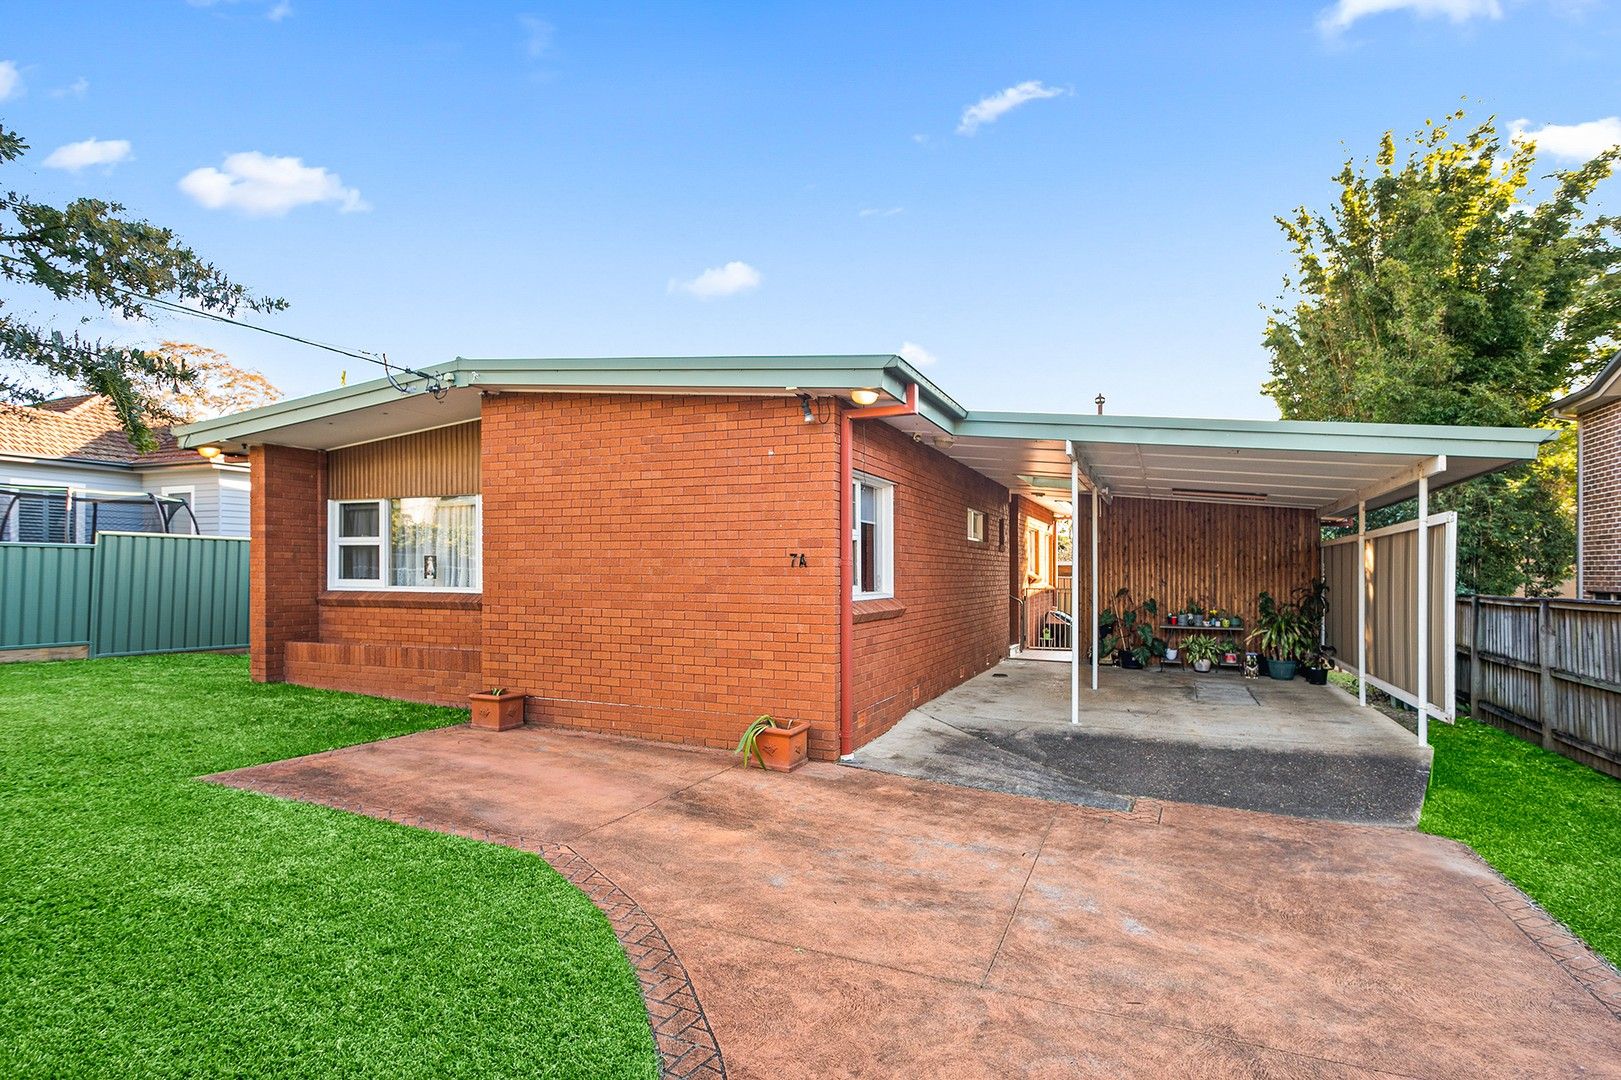 7a Coral Road, Woolooware NSW 2230, Image 0